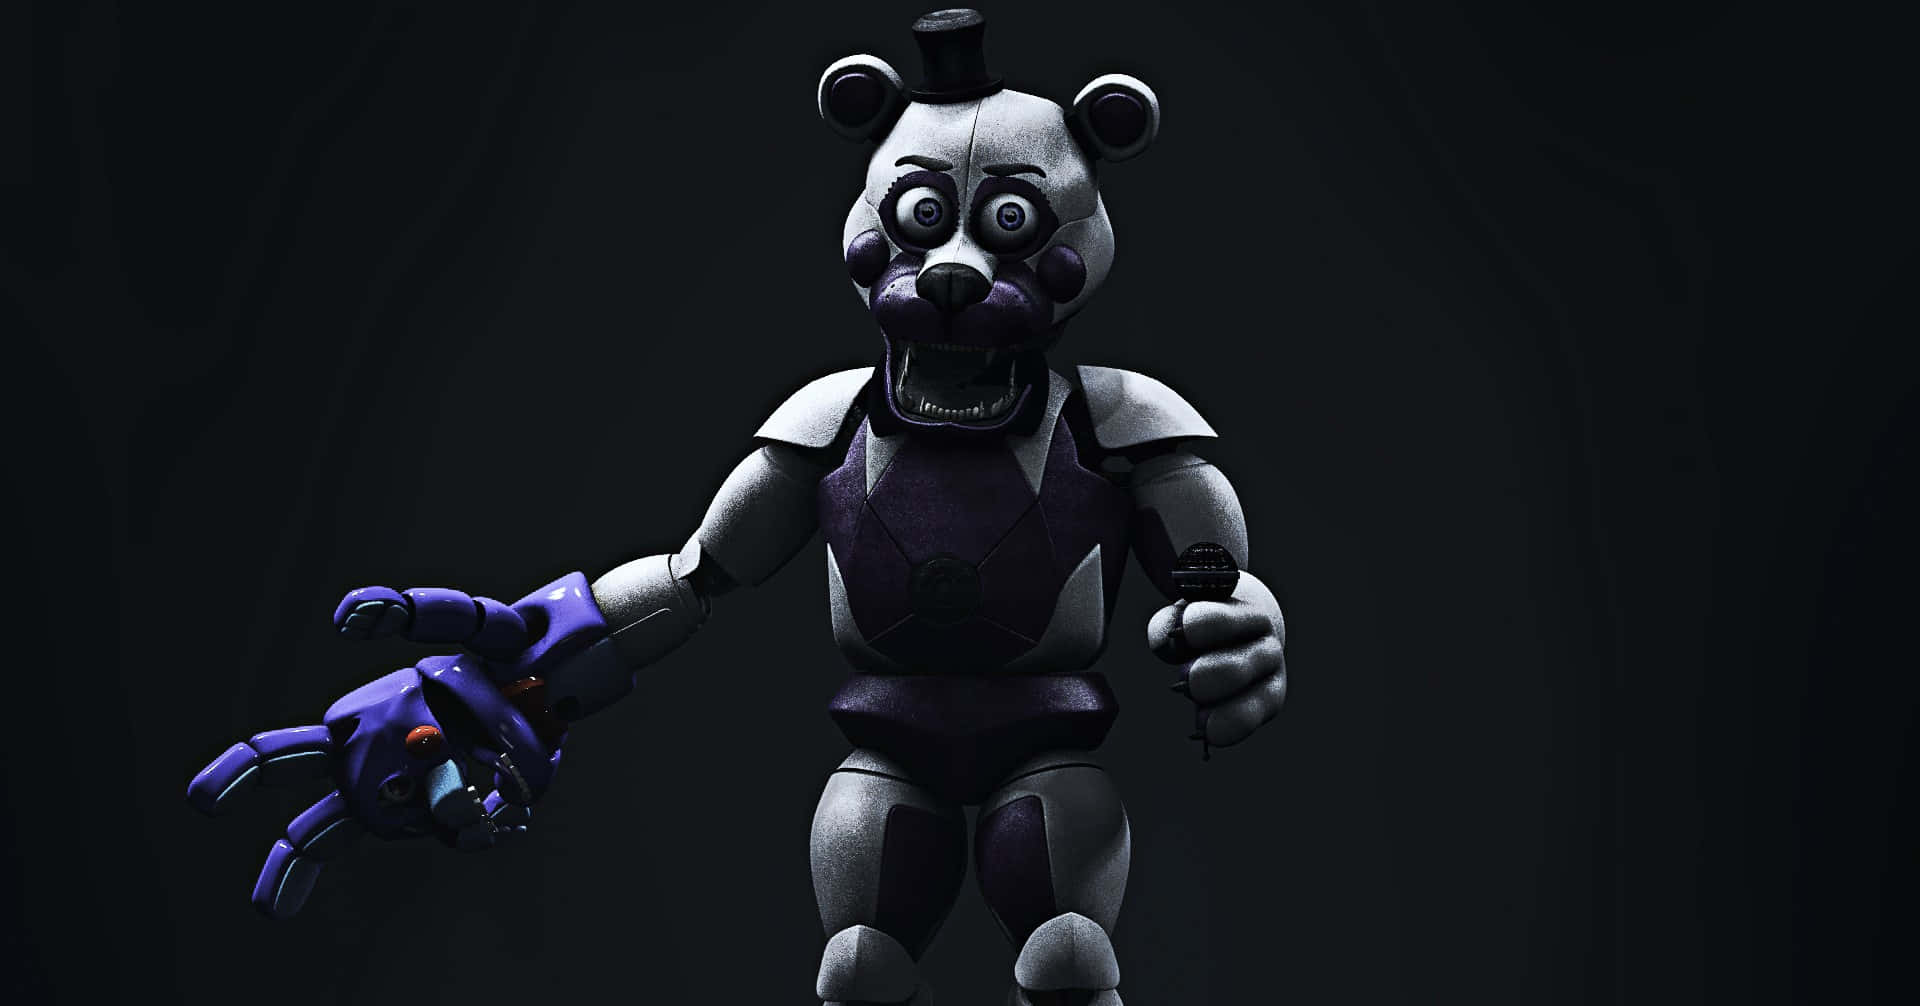 Funtime Freddy, the playful animatronic entertainer Wallpaper